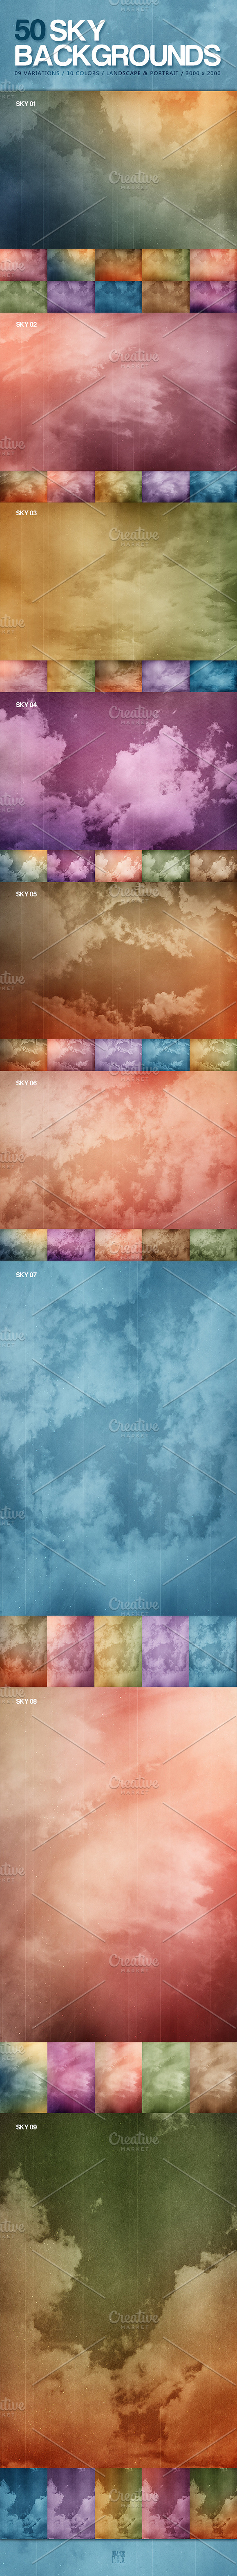 50 Sky Backgrounds in Textures - product preview 4